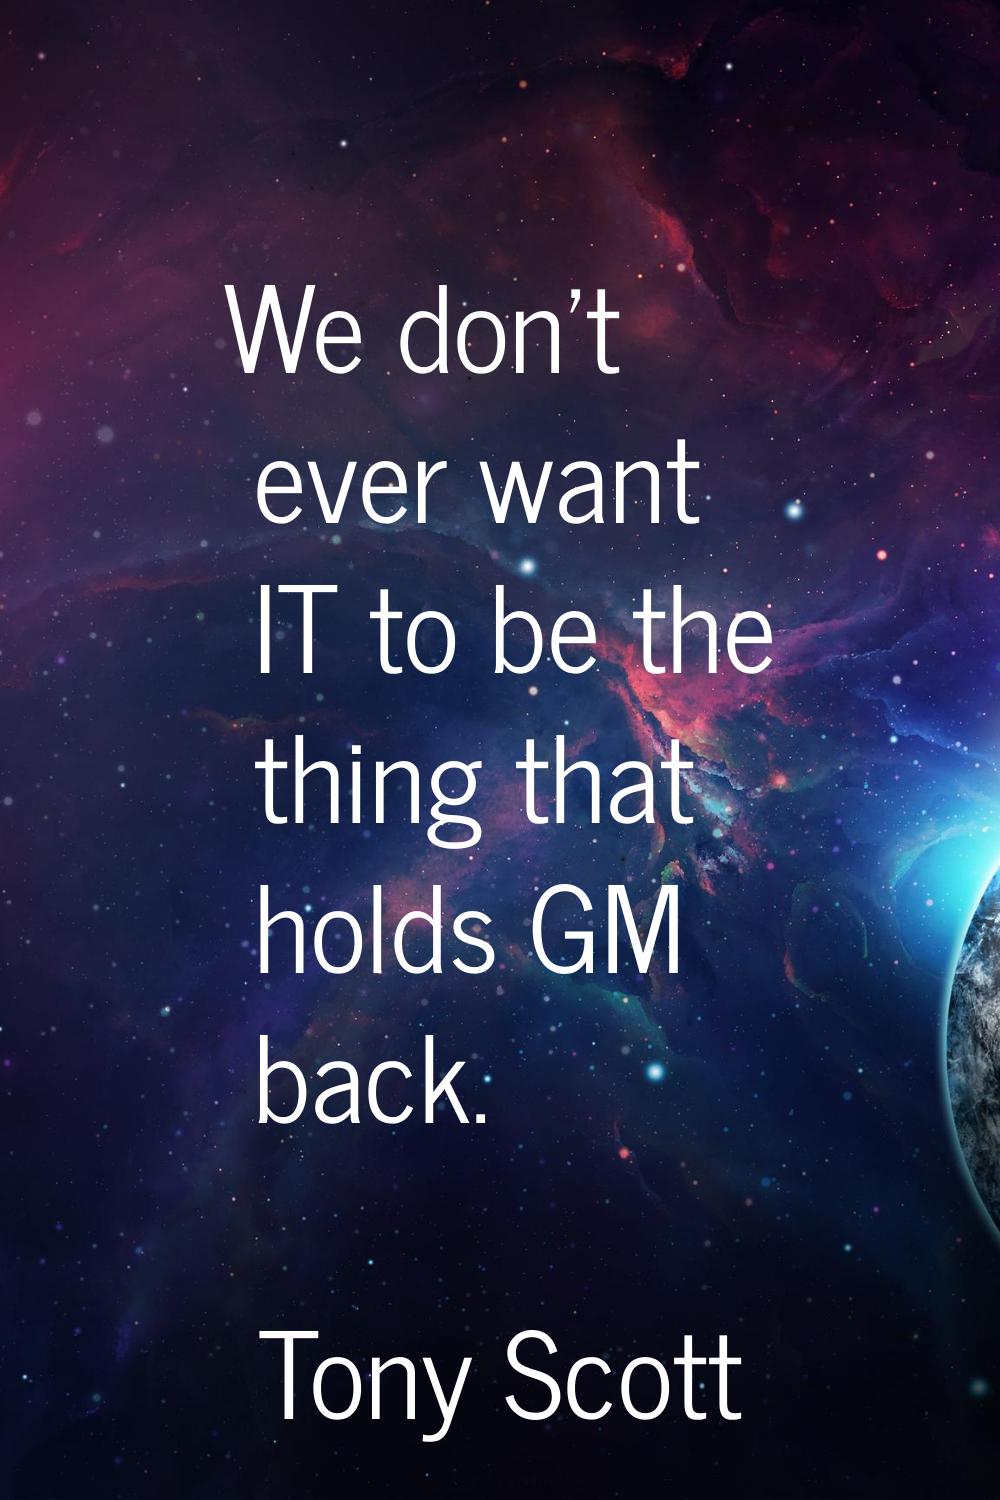 We don't ever want IT to be the thing that holds GM back.